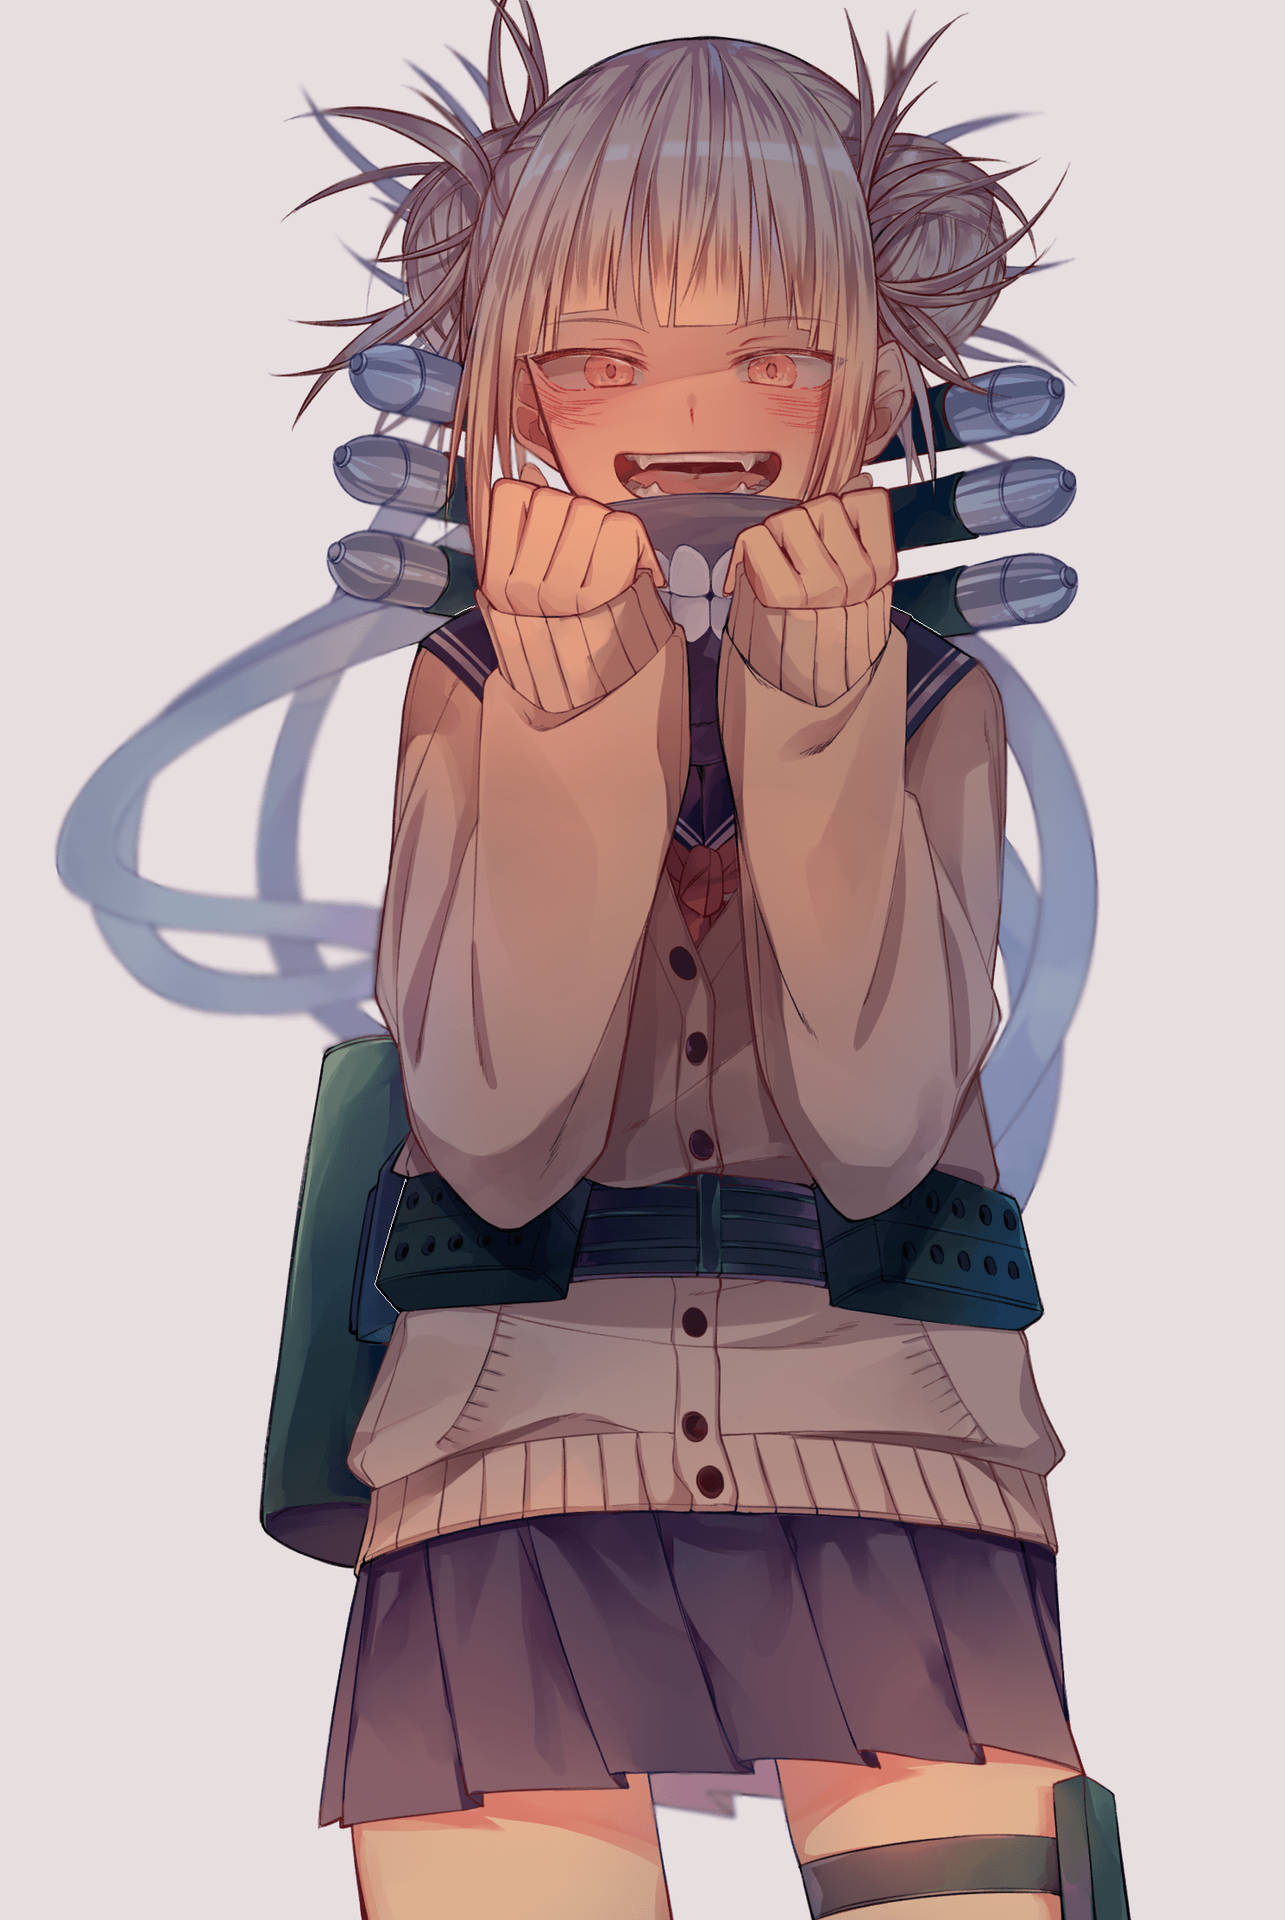 Himiko Toga With Weapons Wallpaper